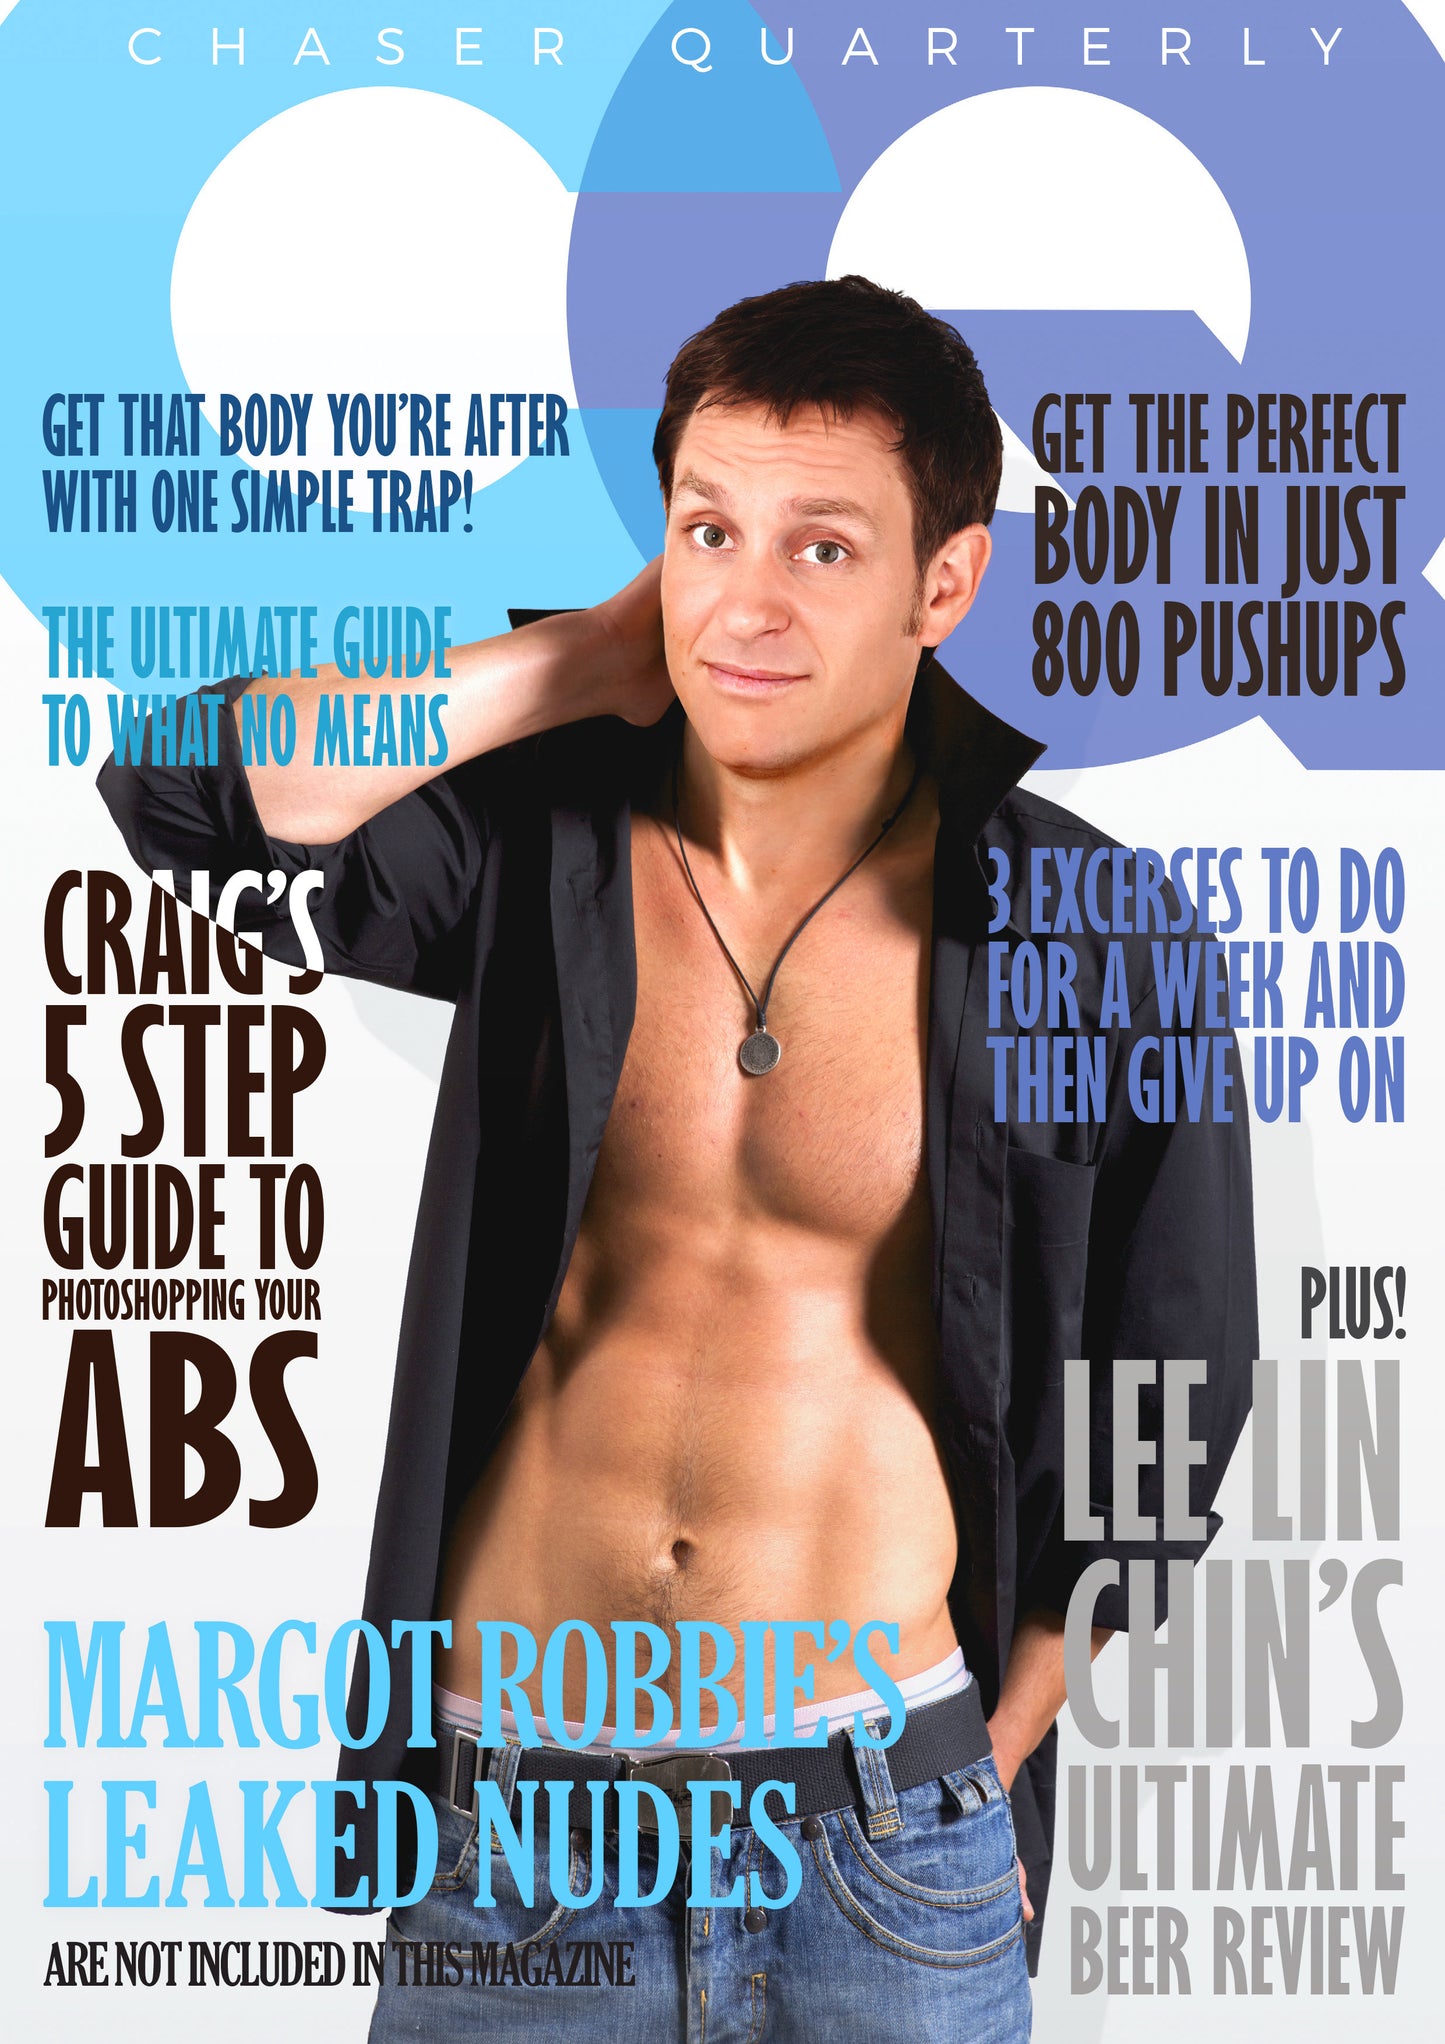 The Chase Her Quarterly (Mens Health Edition) (CQ9)